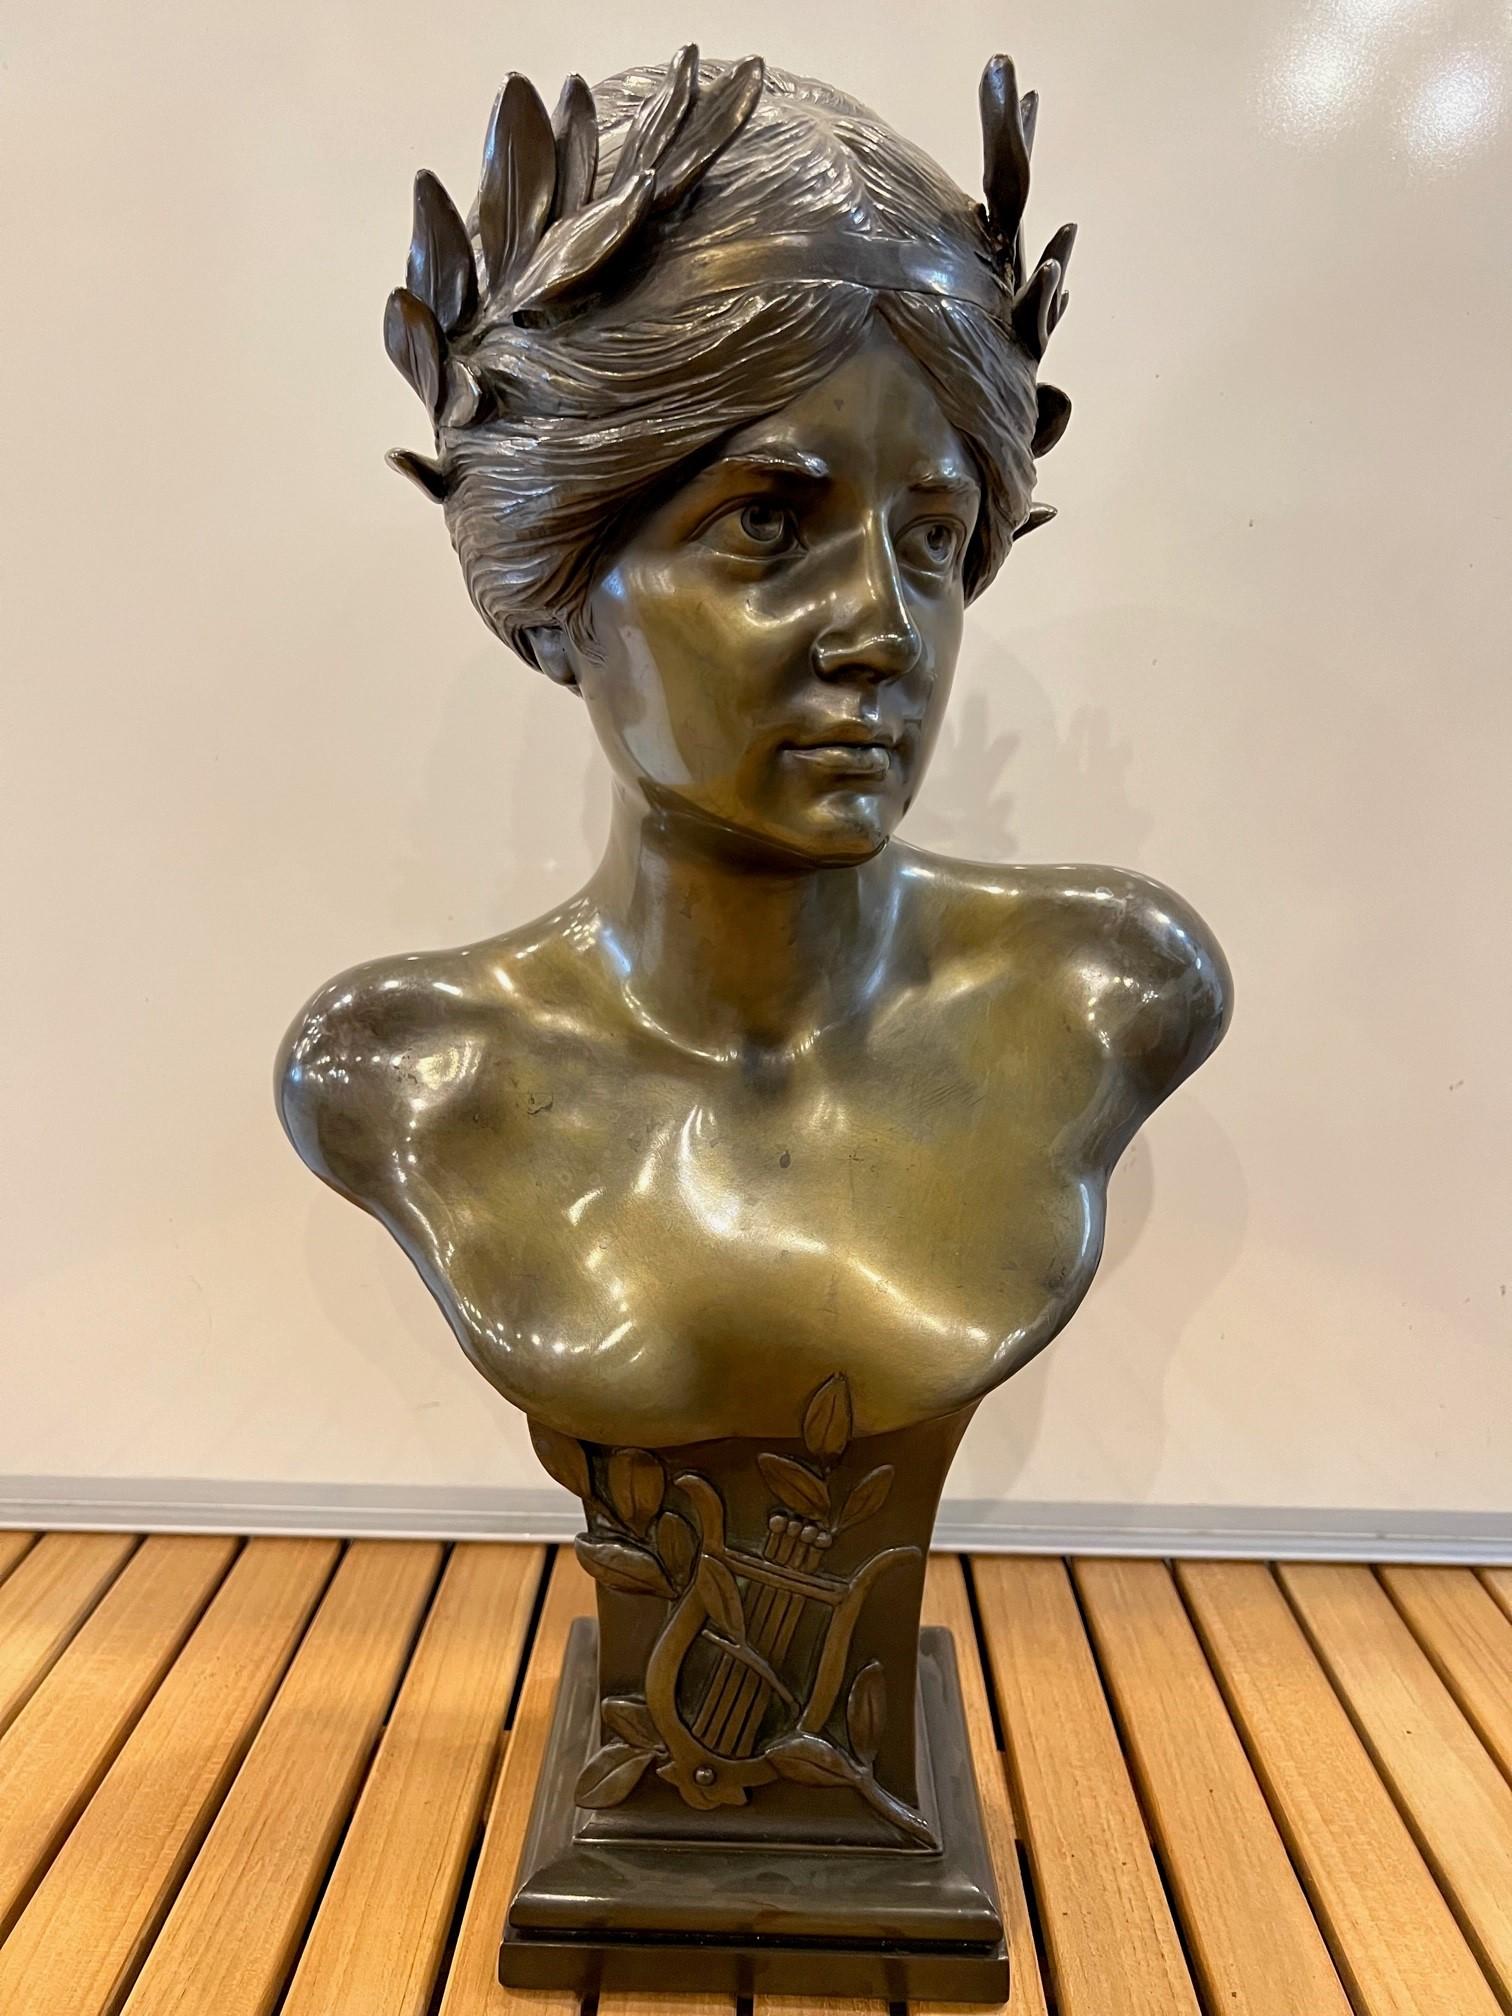 The Mousai (Muses) were the goddesses of music, song and dance, the source of inspirations to poets. They were also goddesses of knowledge who remembered all things that had come to pass. This is a beautiful polished bronze bust with her hair tied